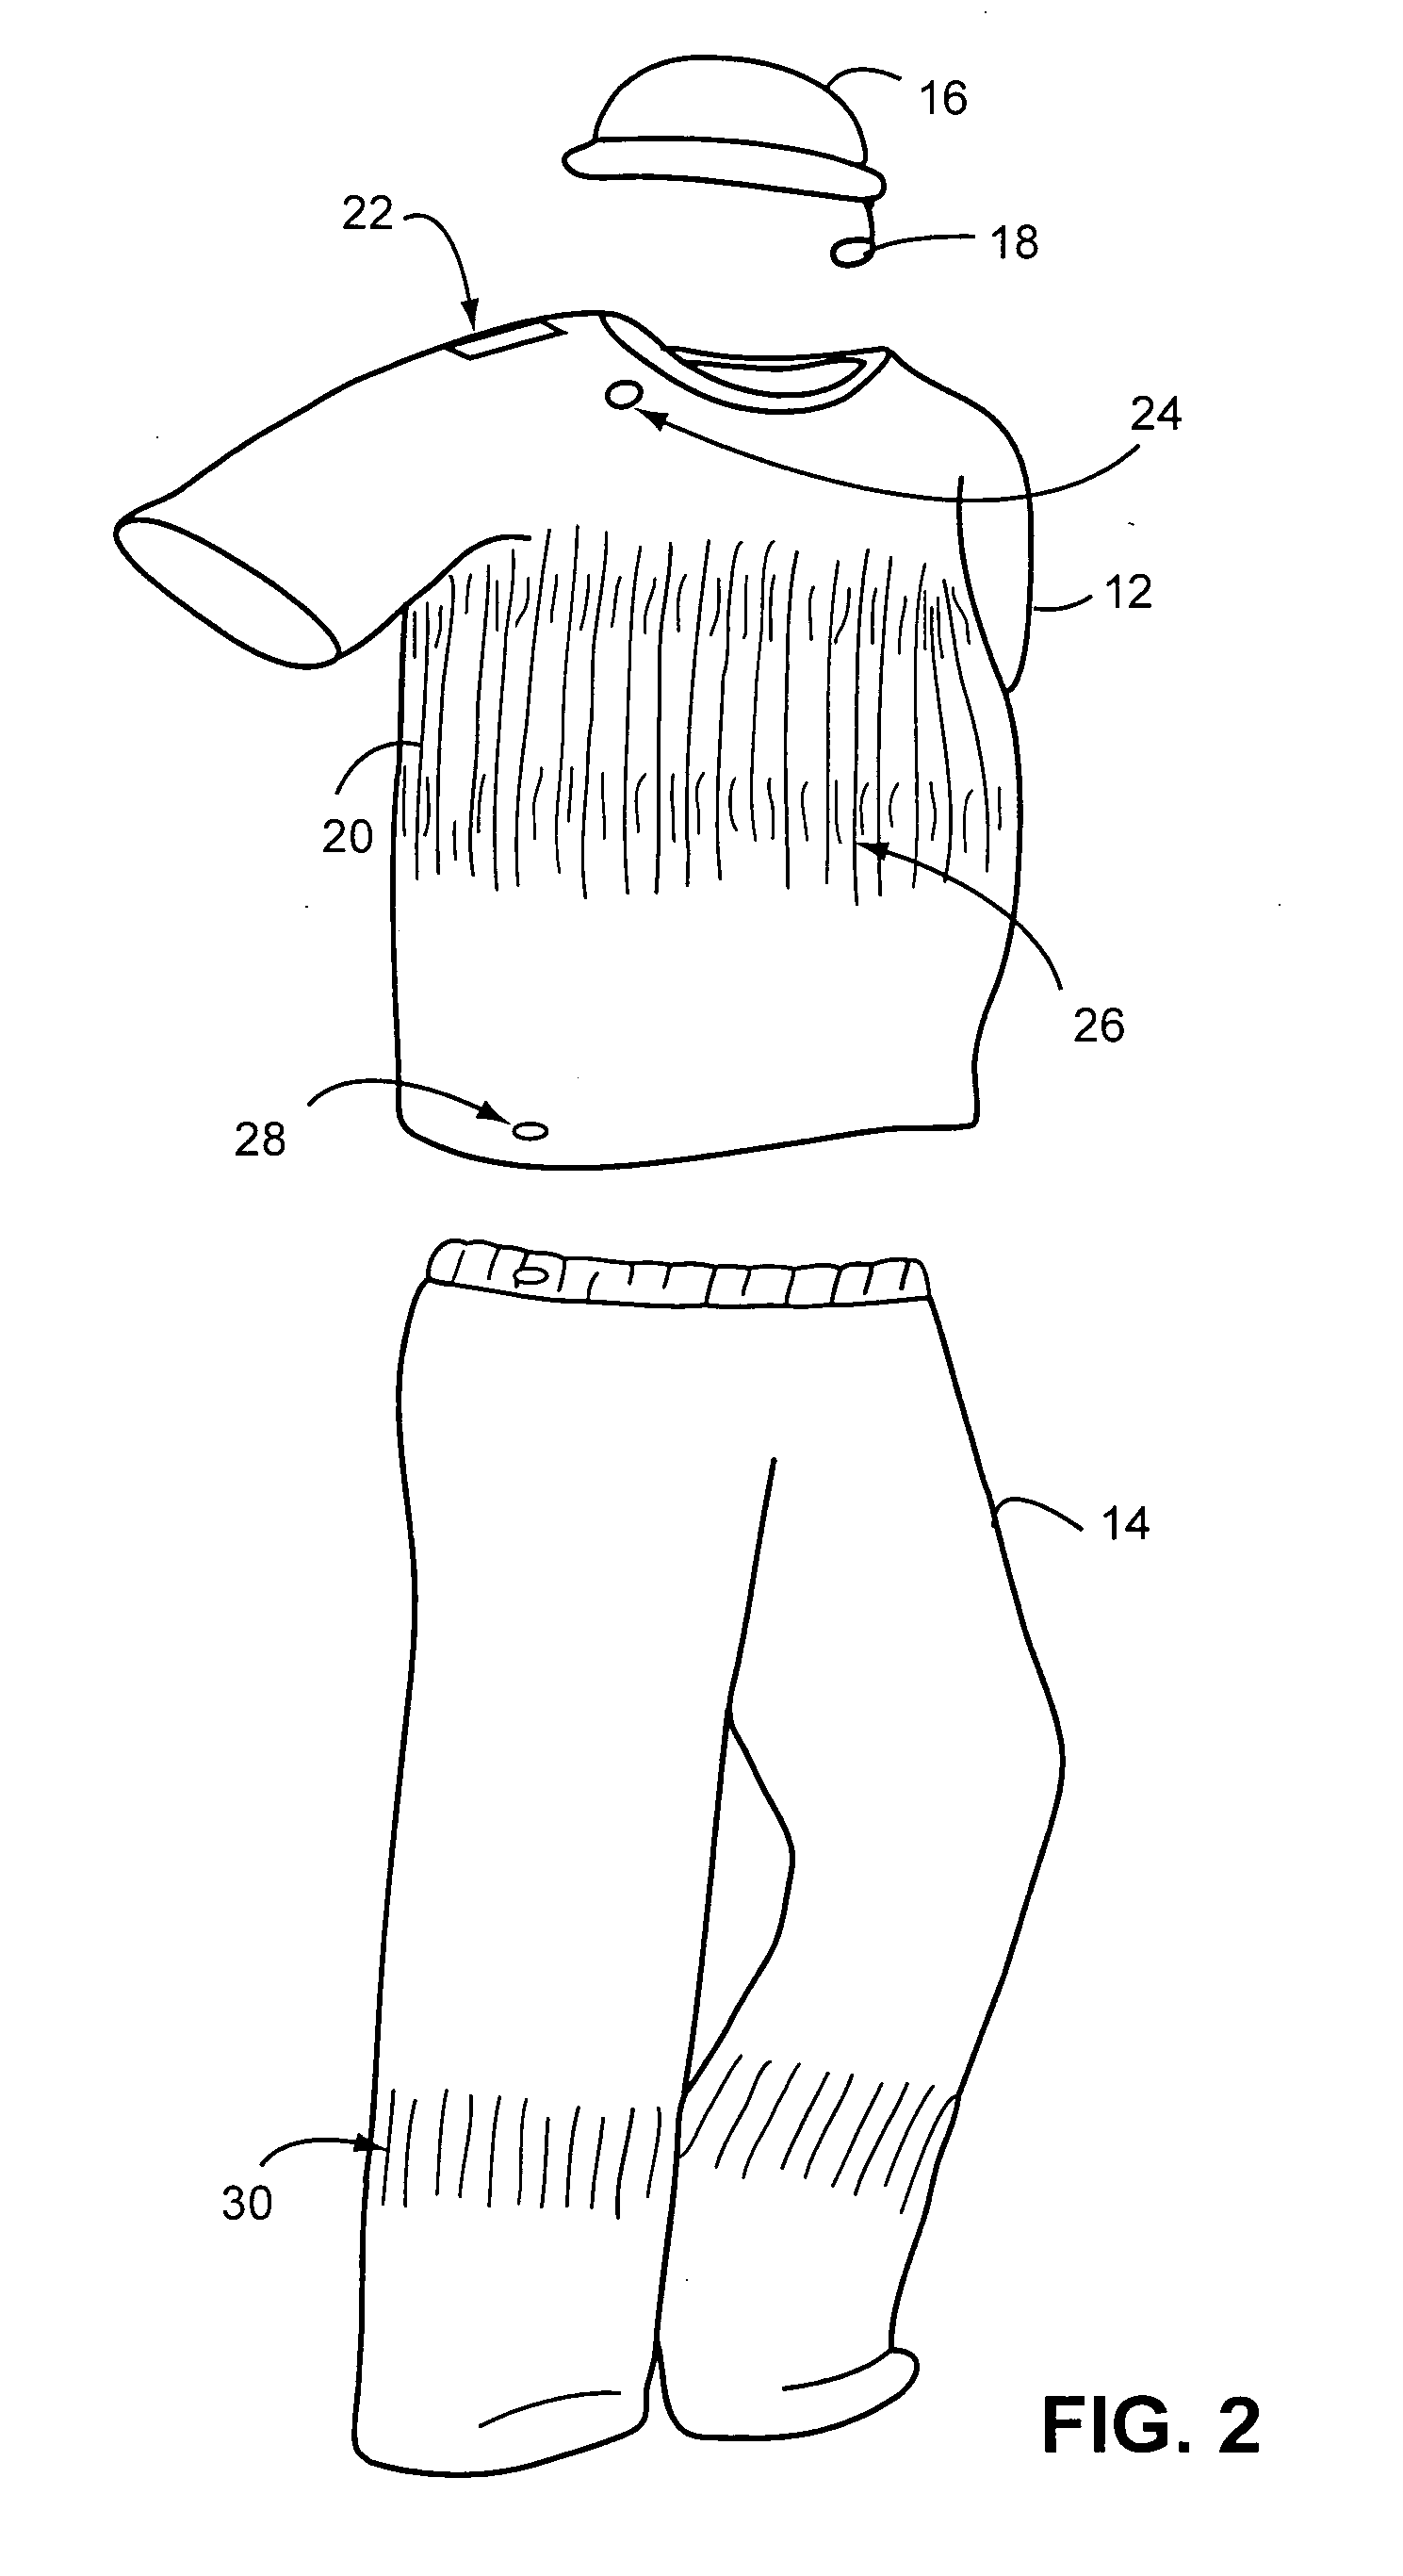 Sleep disorder diagnostic system and method